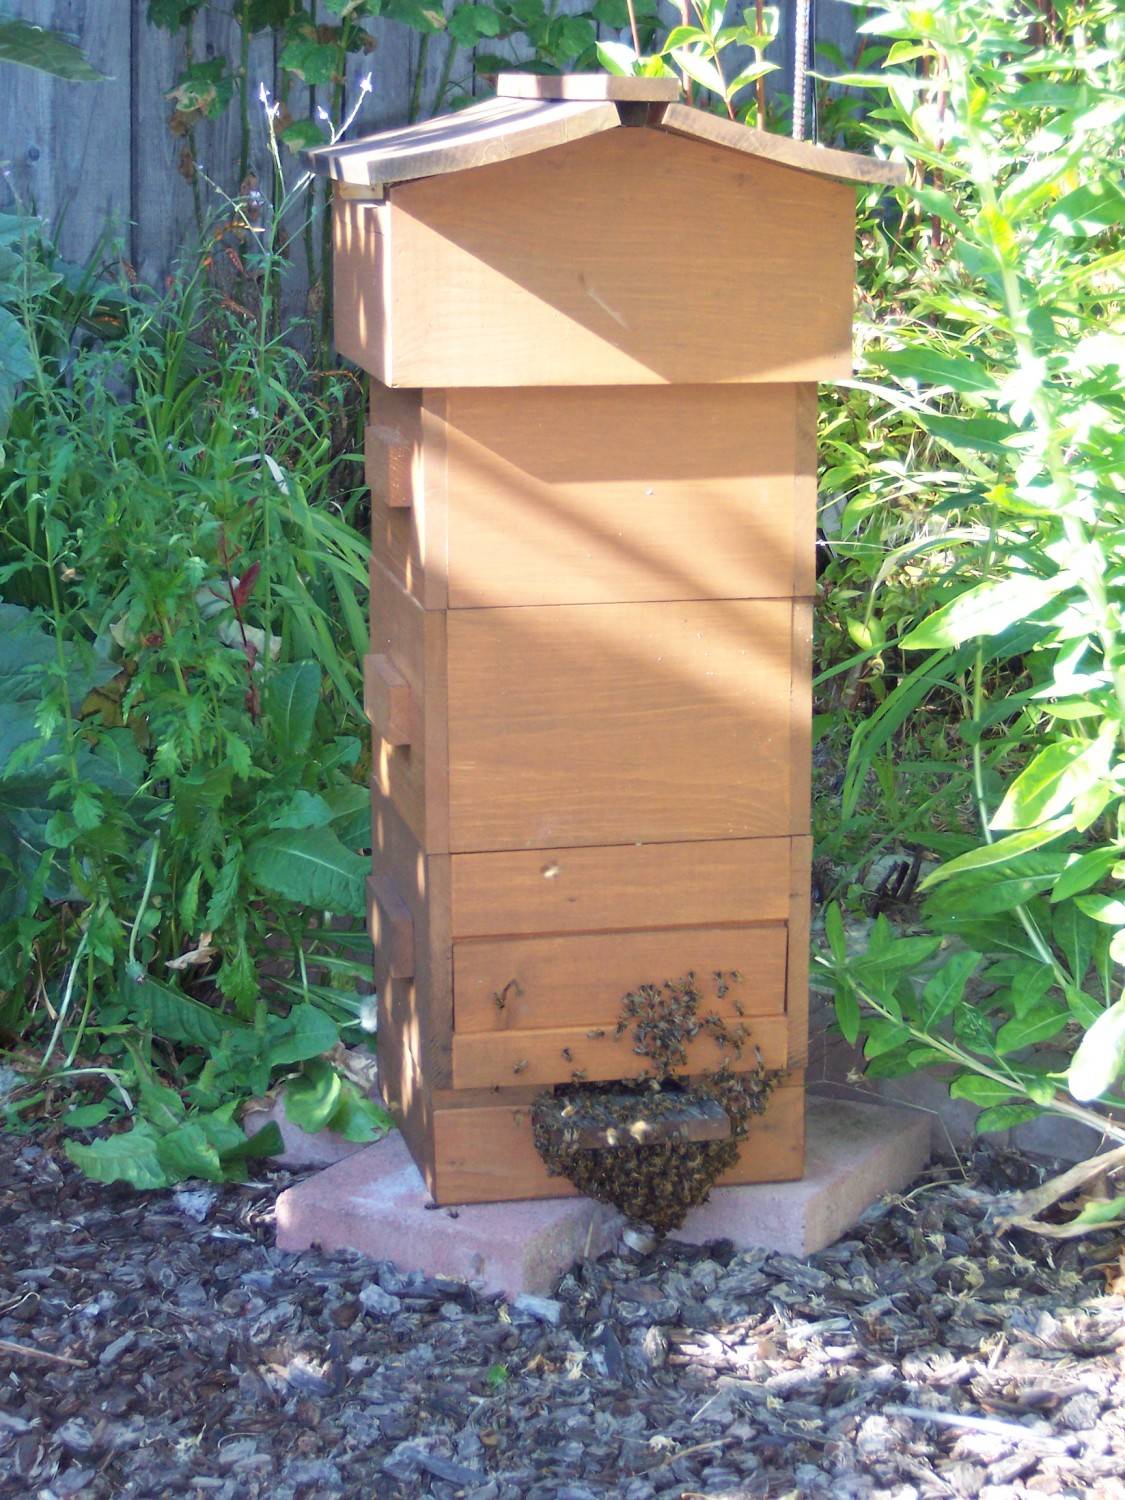 A small wooden Warre bee hive in a garden